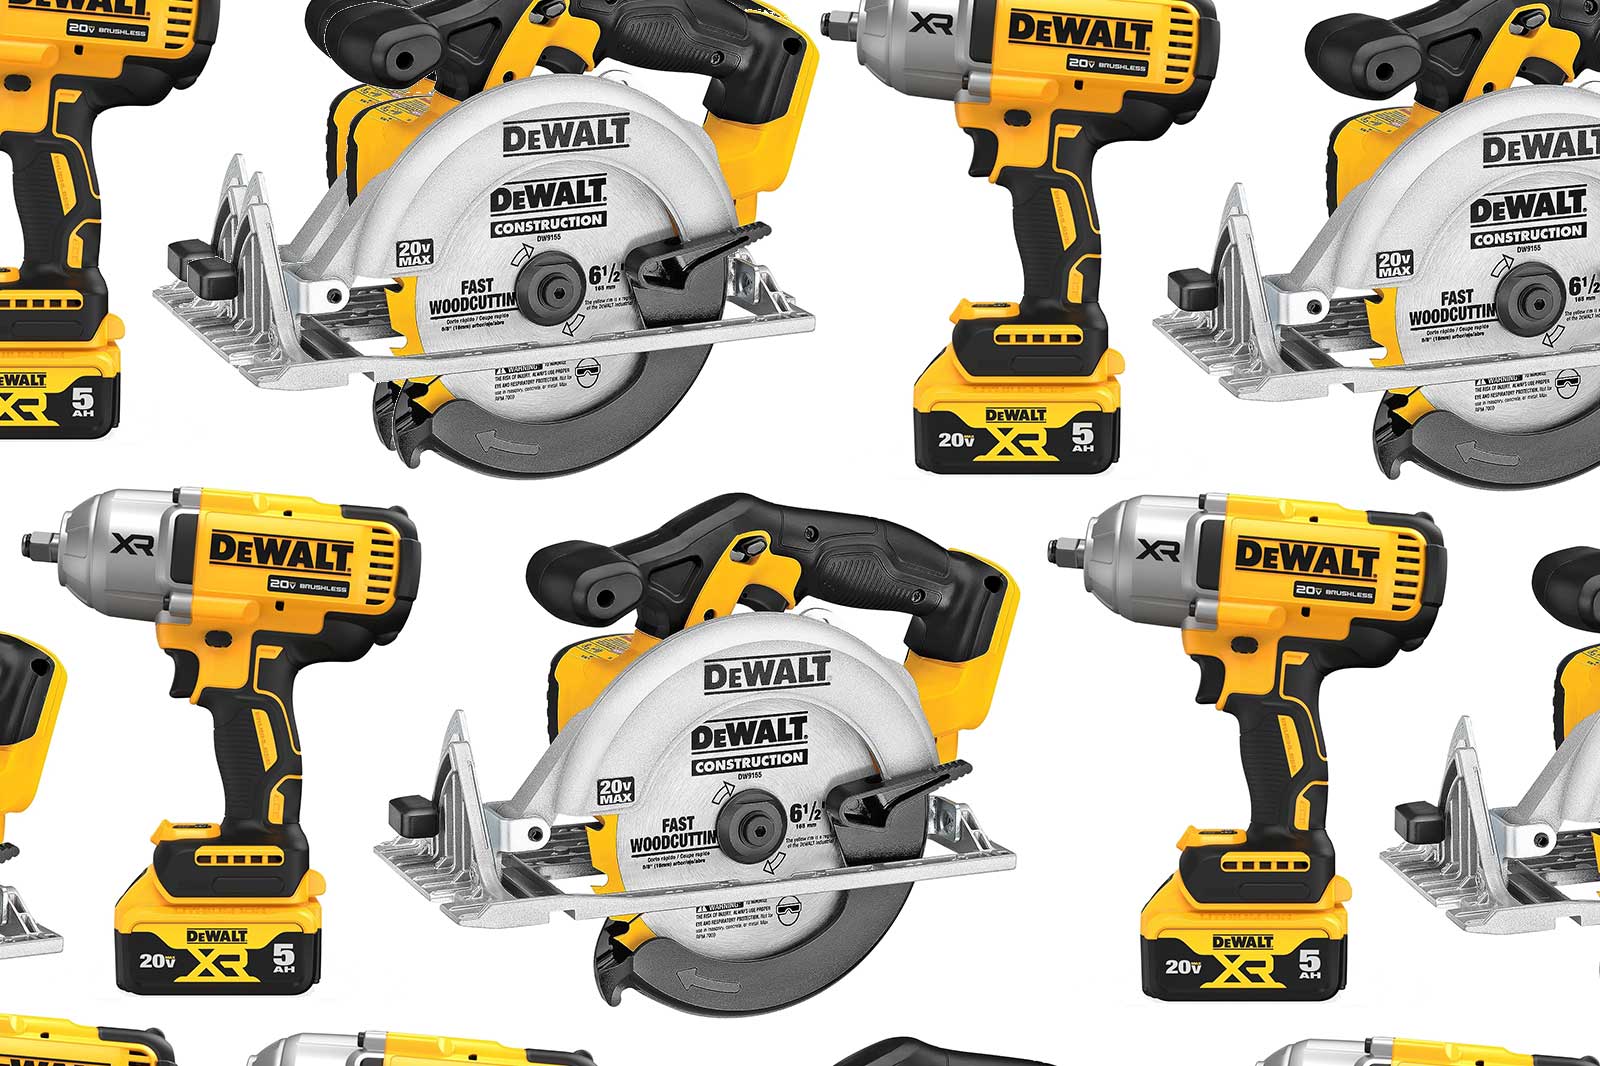 Save up to 50% on DeWalt power tools, batteries, and kits during Amazon’s early Black Friday sale